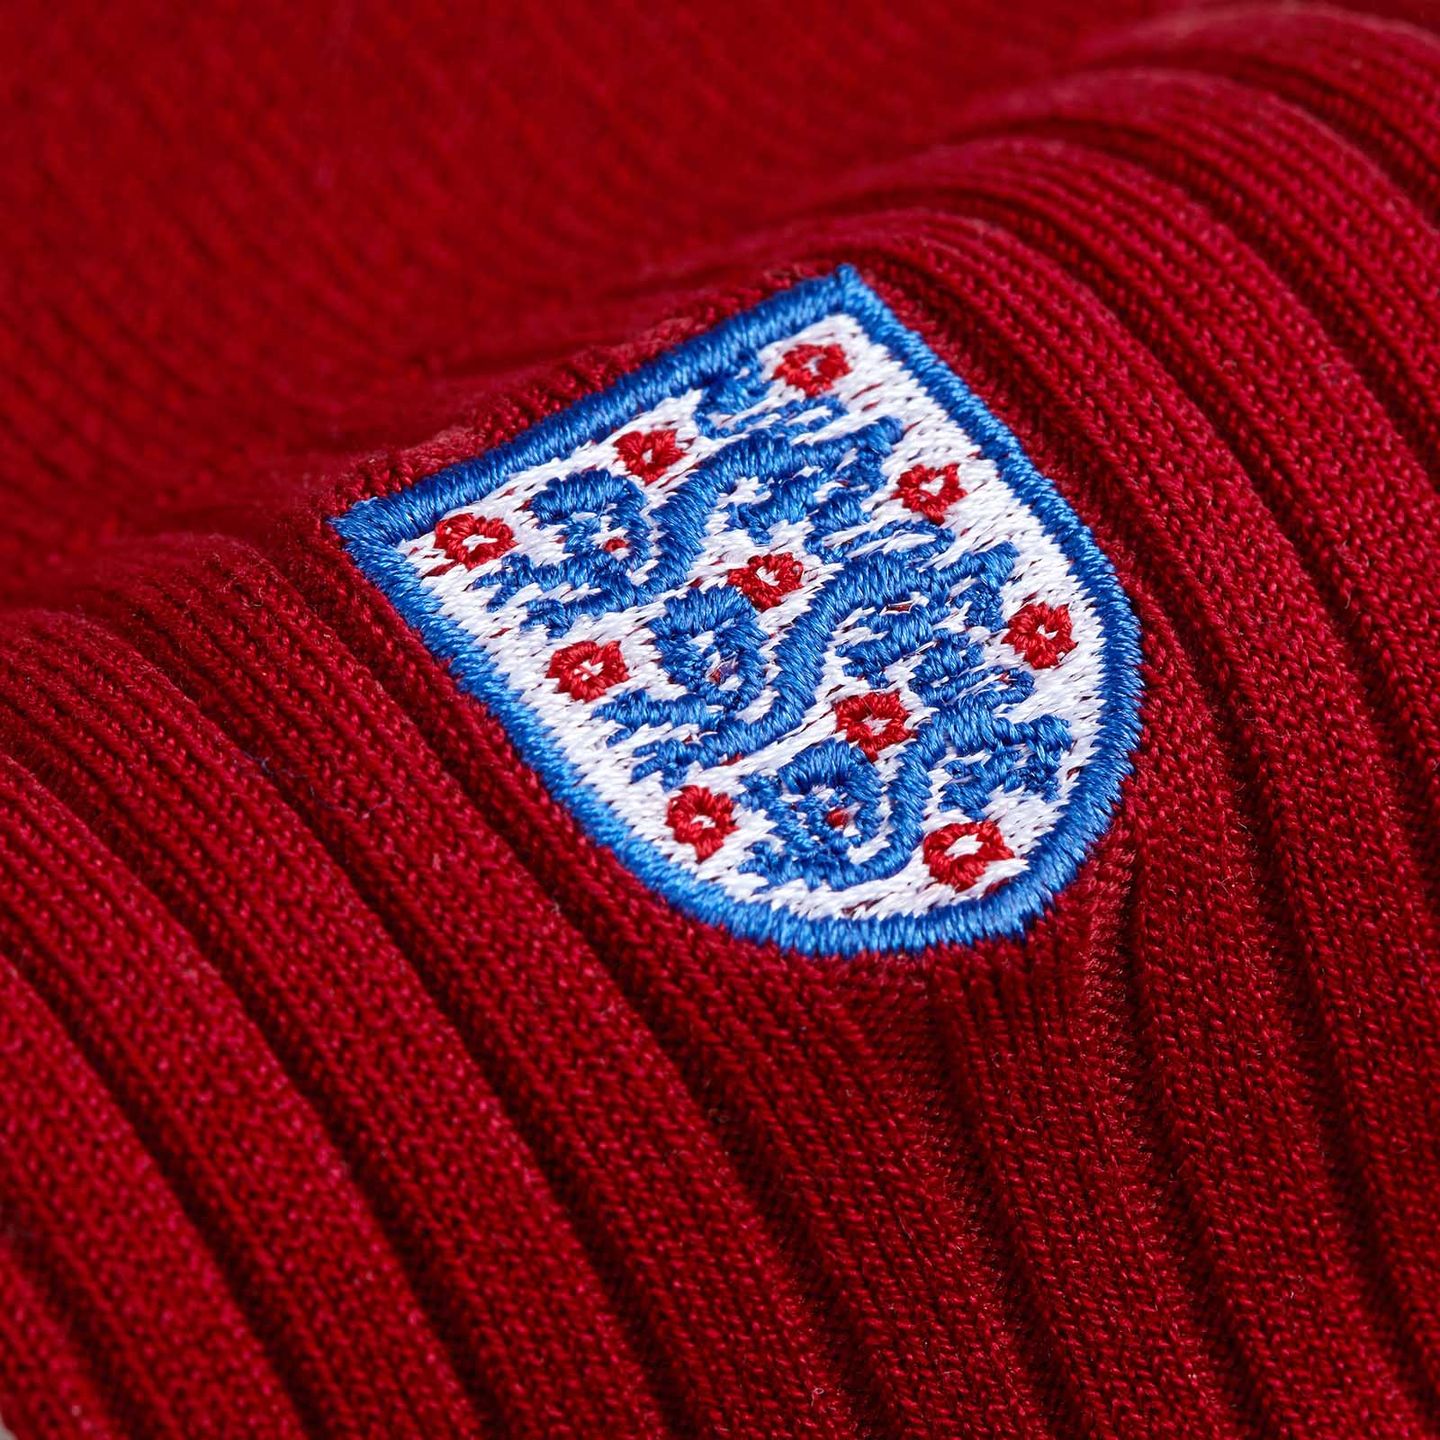 A close up of the England badge on a red sock